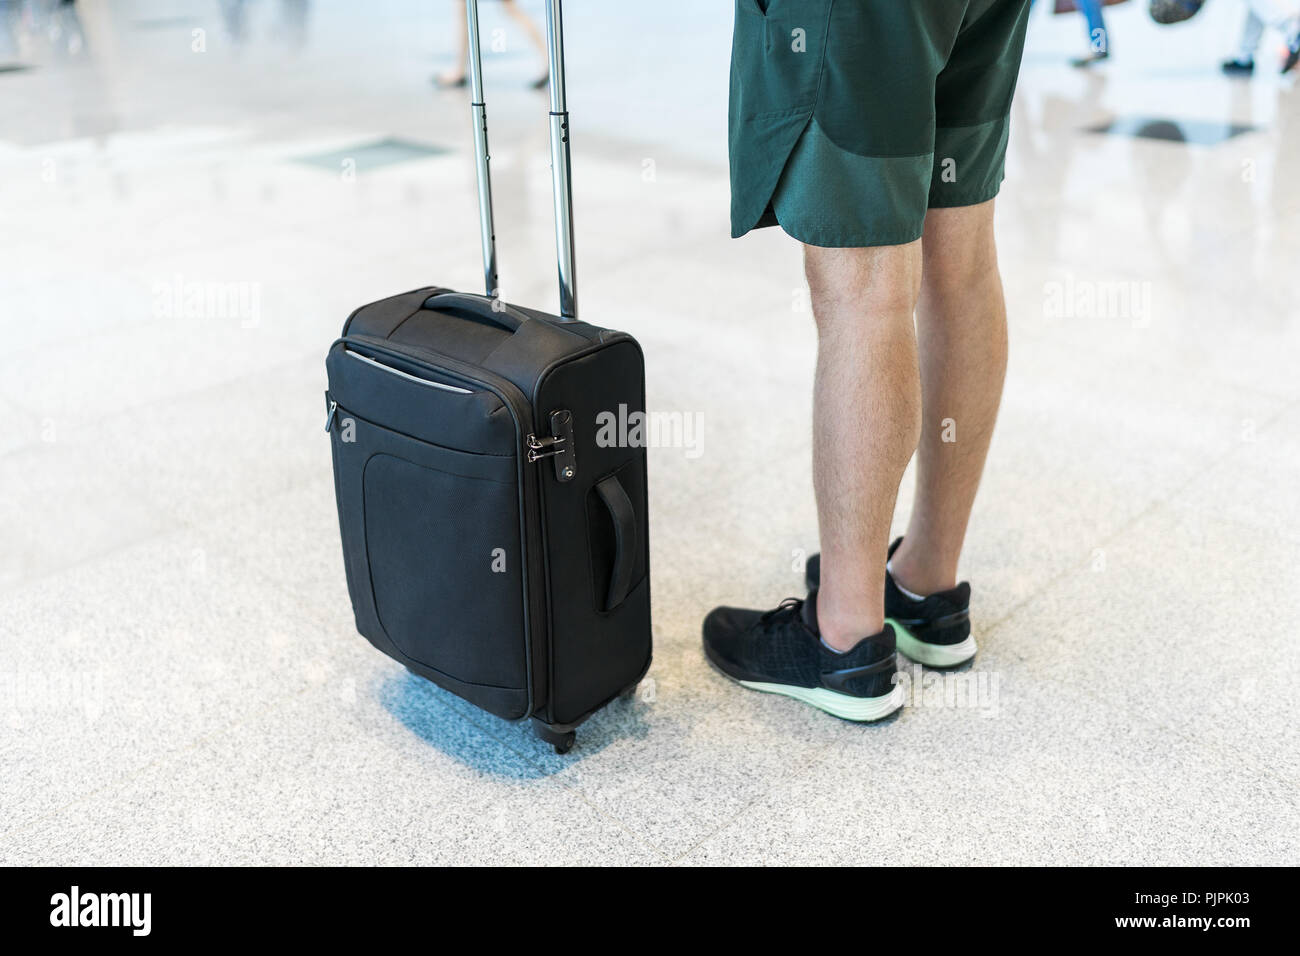 Young man wearing shorts and sneakers is standing at the airport holding a  small-sized black suitcase with 4 wheels Stock Photo - Alamy